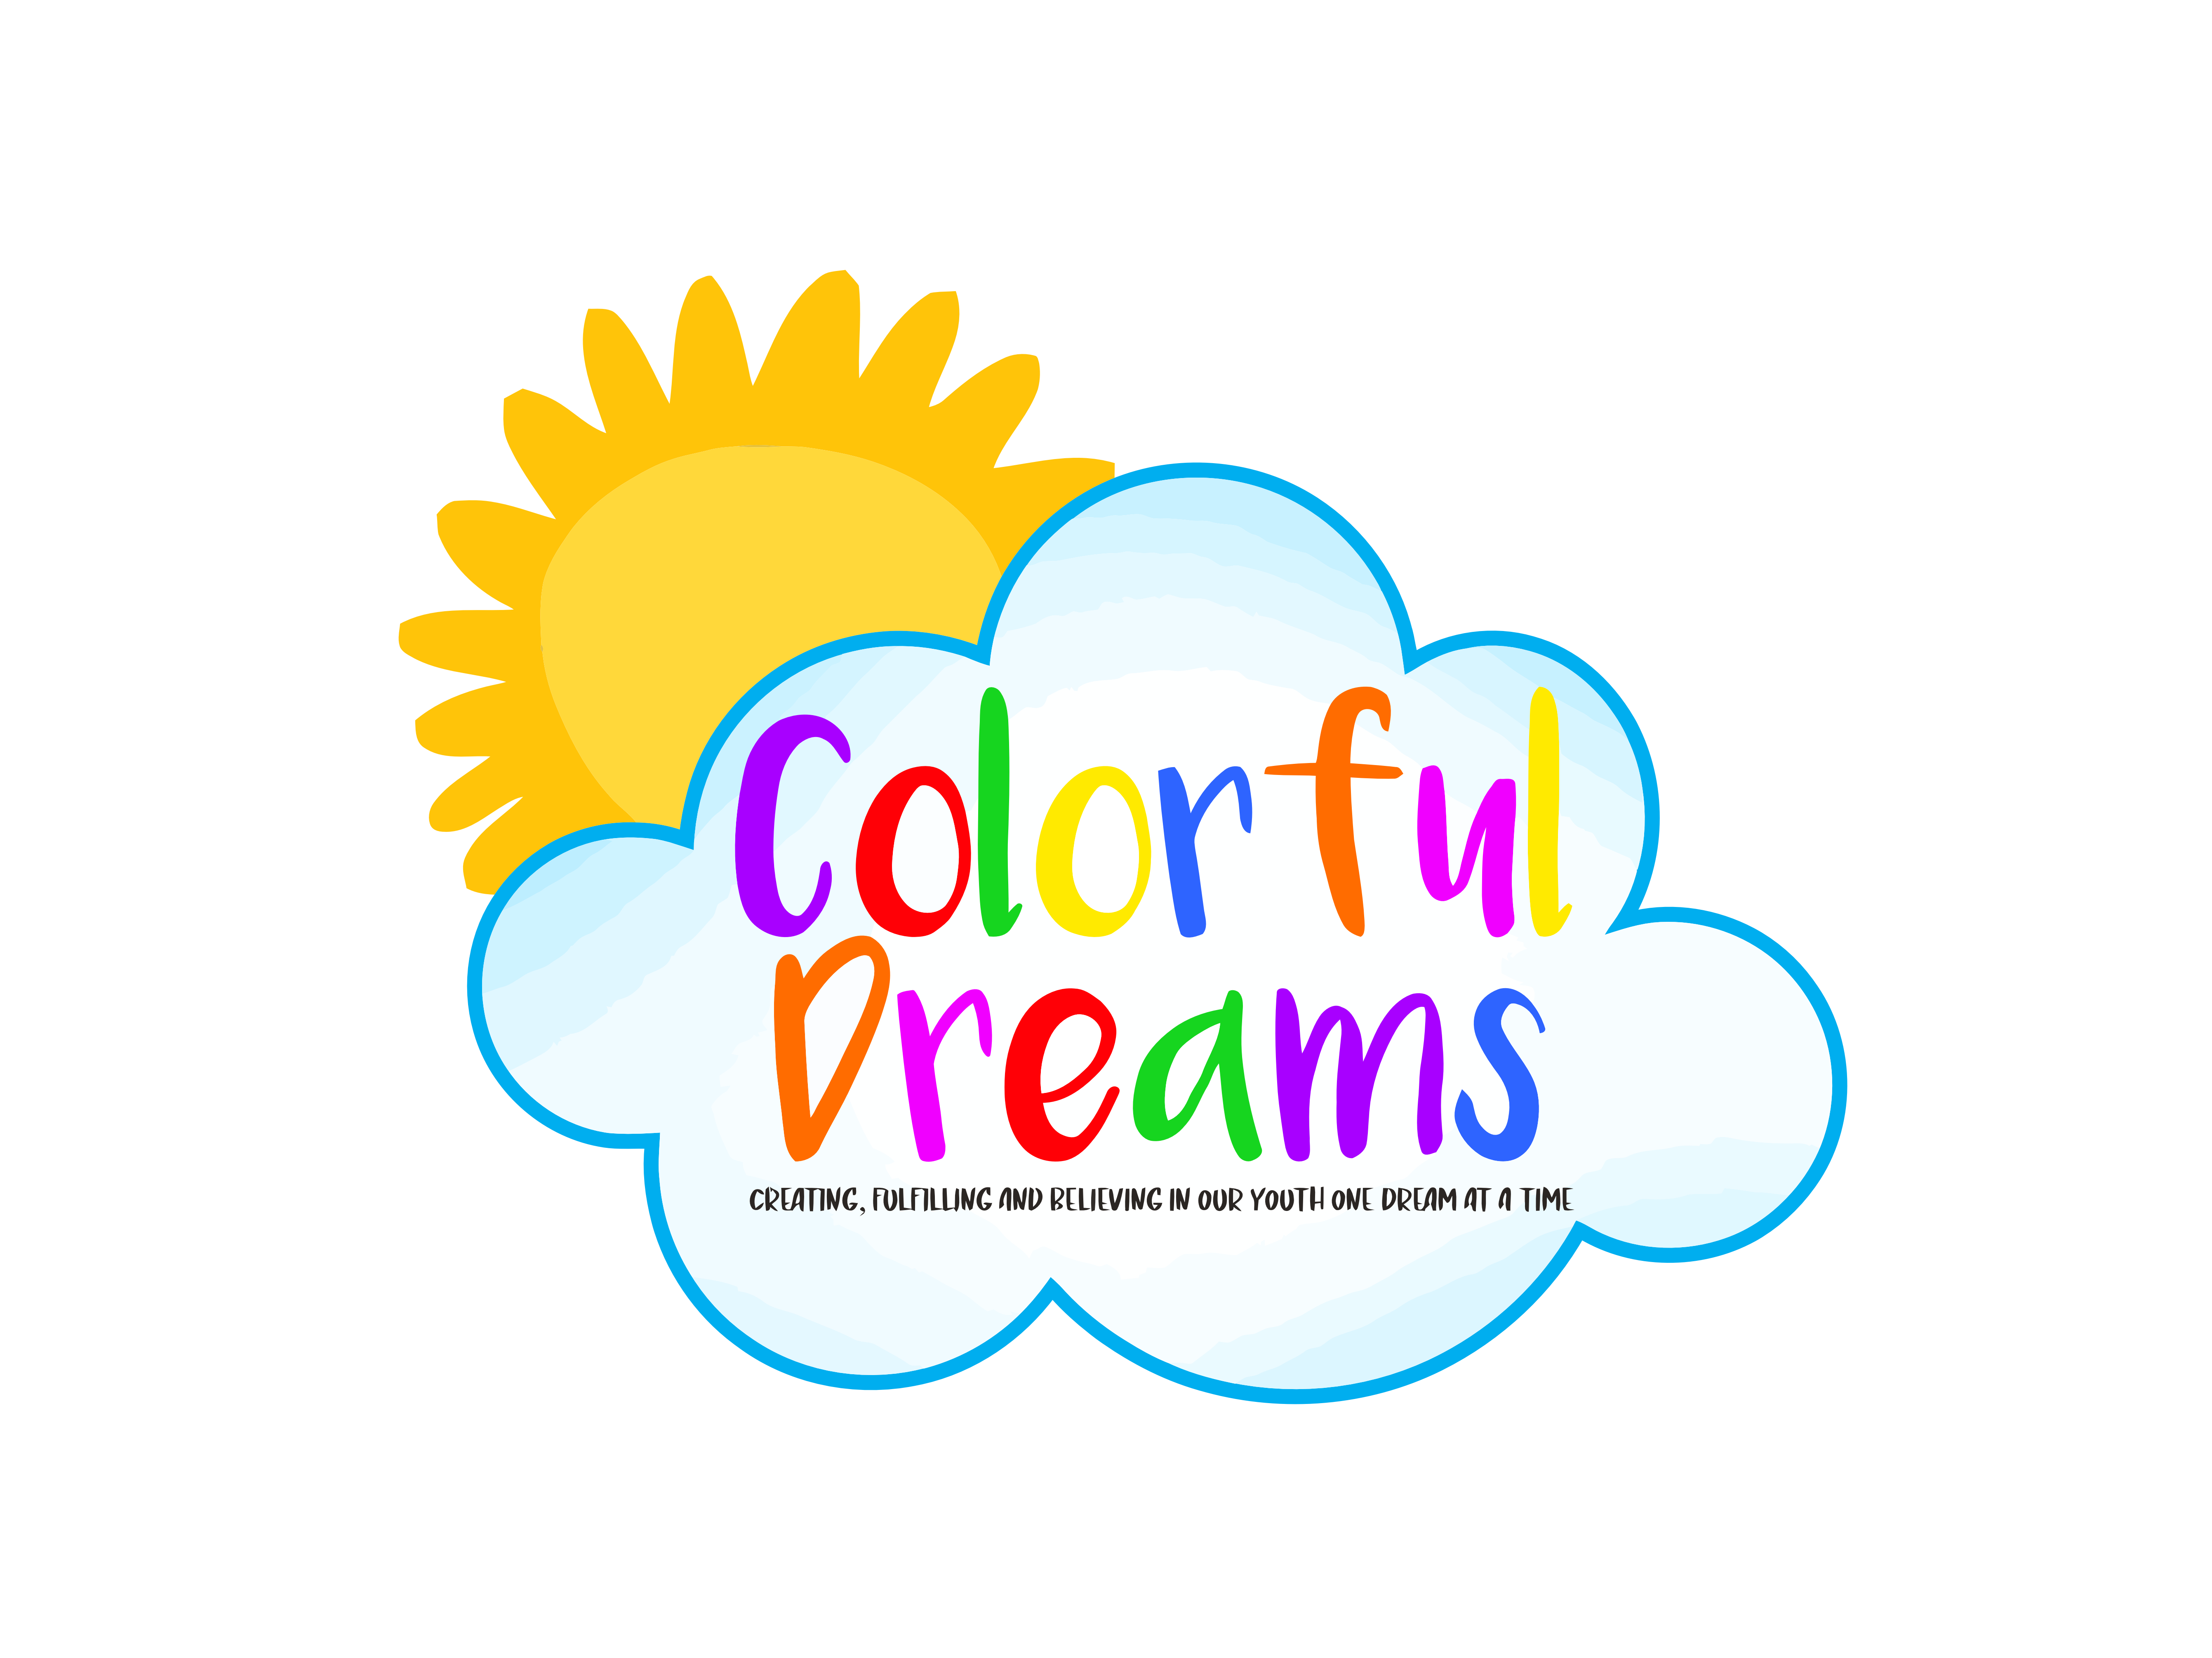 Colorful Dreams Youth Center, Monday, March 30, 2020, Press release picture